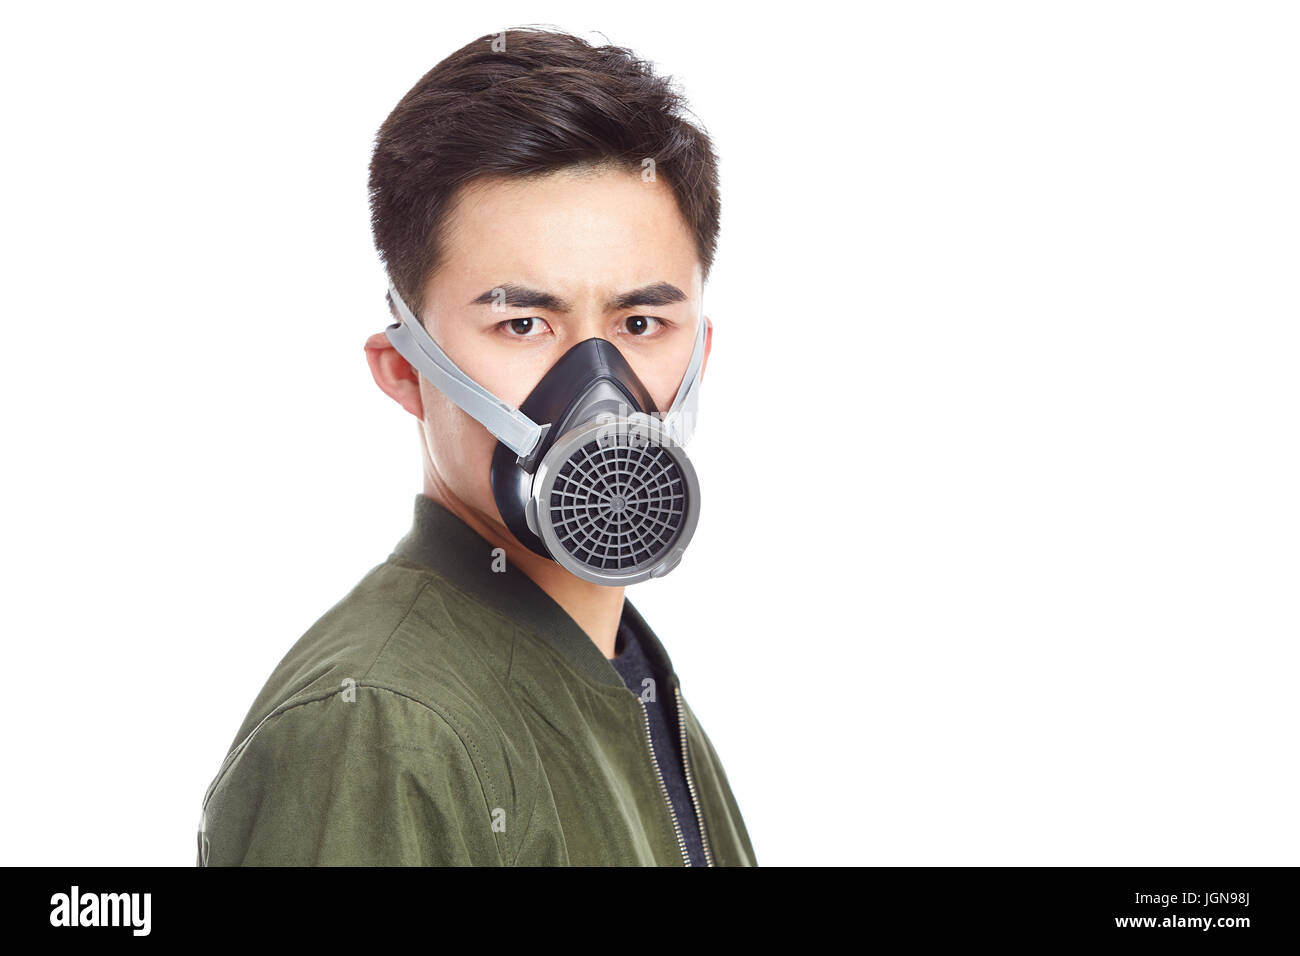 young asian man wearing gas mask staring at camera, isolated on white background. Stock Photo